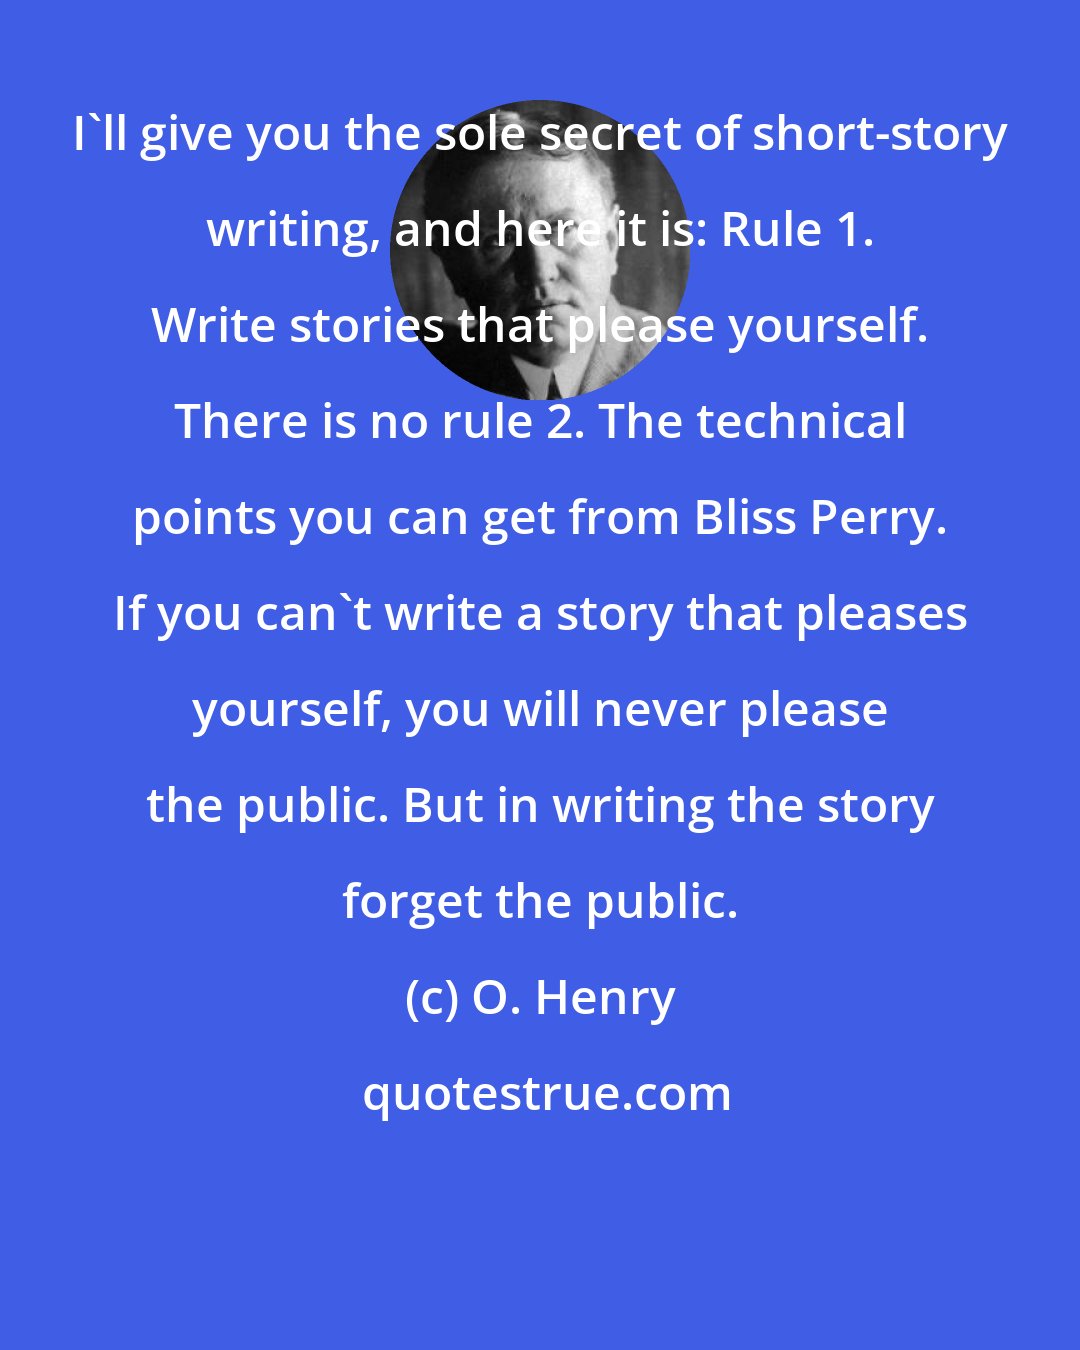 O. Henry: I'll give you the sole secret of short-story writing, and here it is: Rule 1. Write stories that please yourself. There is no rule 2. The technical points you can get from Bliss Perry. If you can't write a story that pleases yourself, you will never please the public. But in writing the story forget the public.